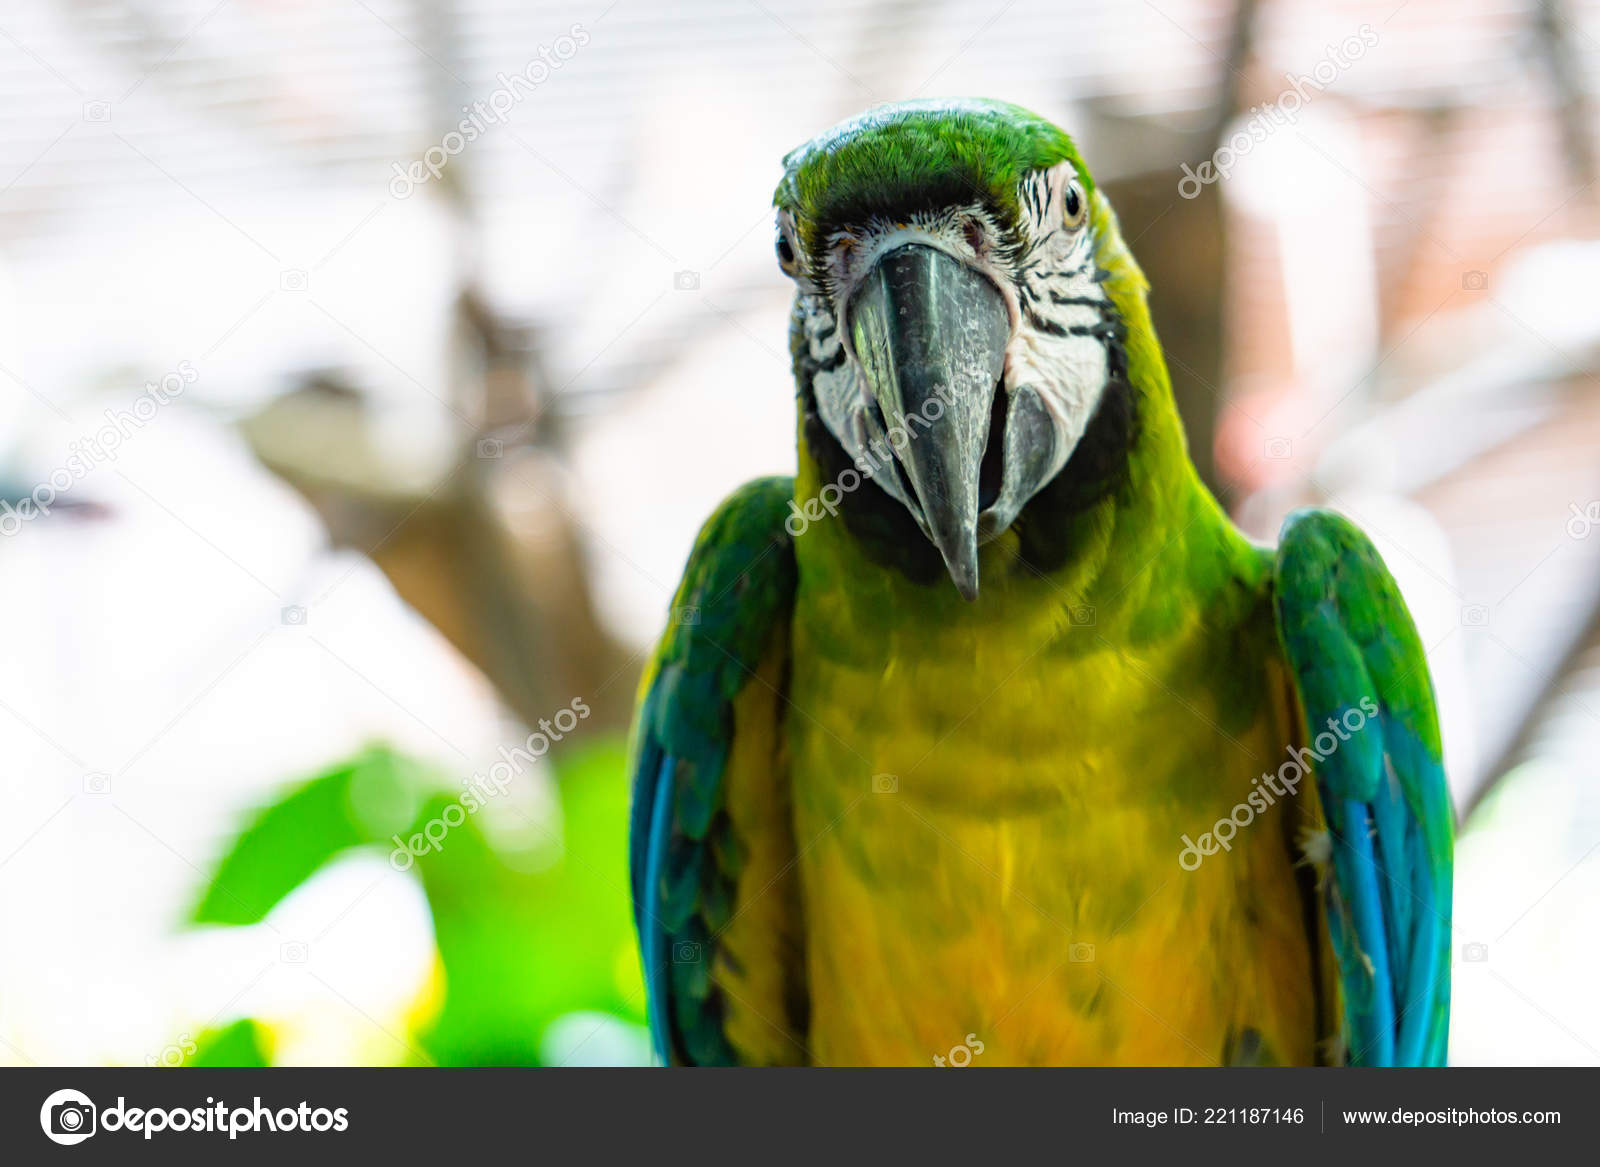 Severe Macaw Parrot Close Chestnut Fronted Macaw Stock Photo C Khoblaun 221187146,Spanish Coffee